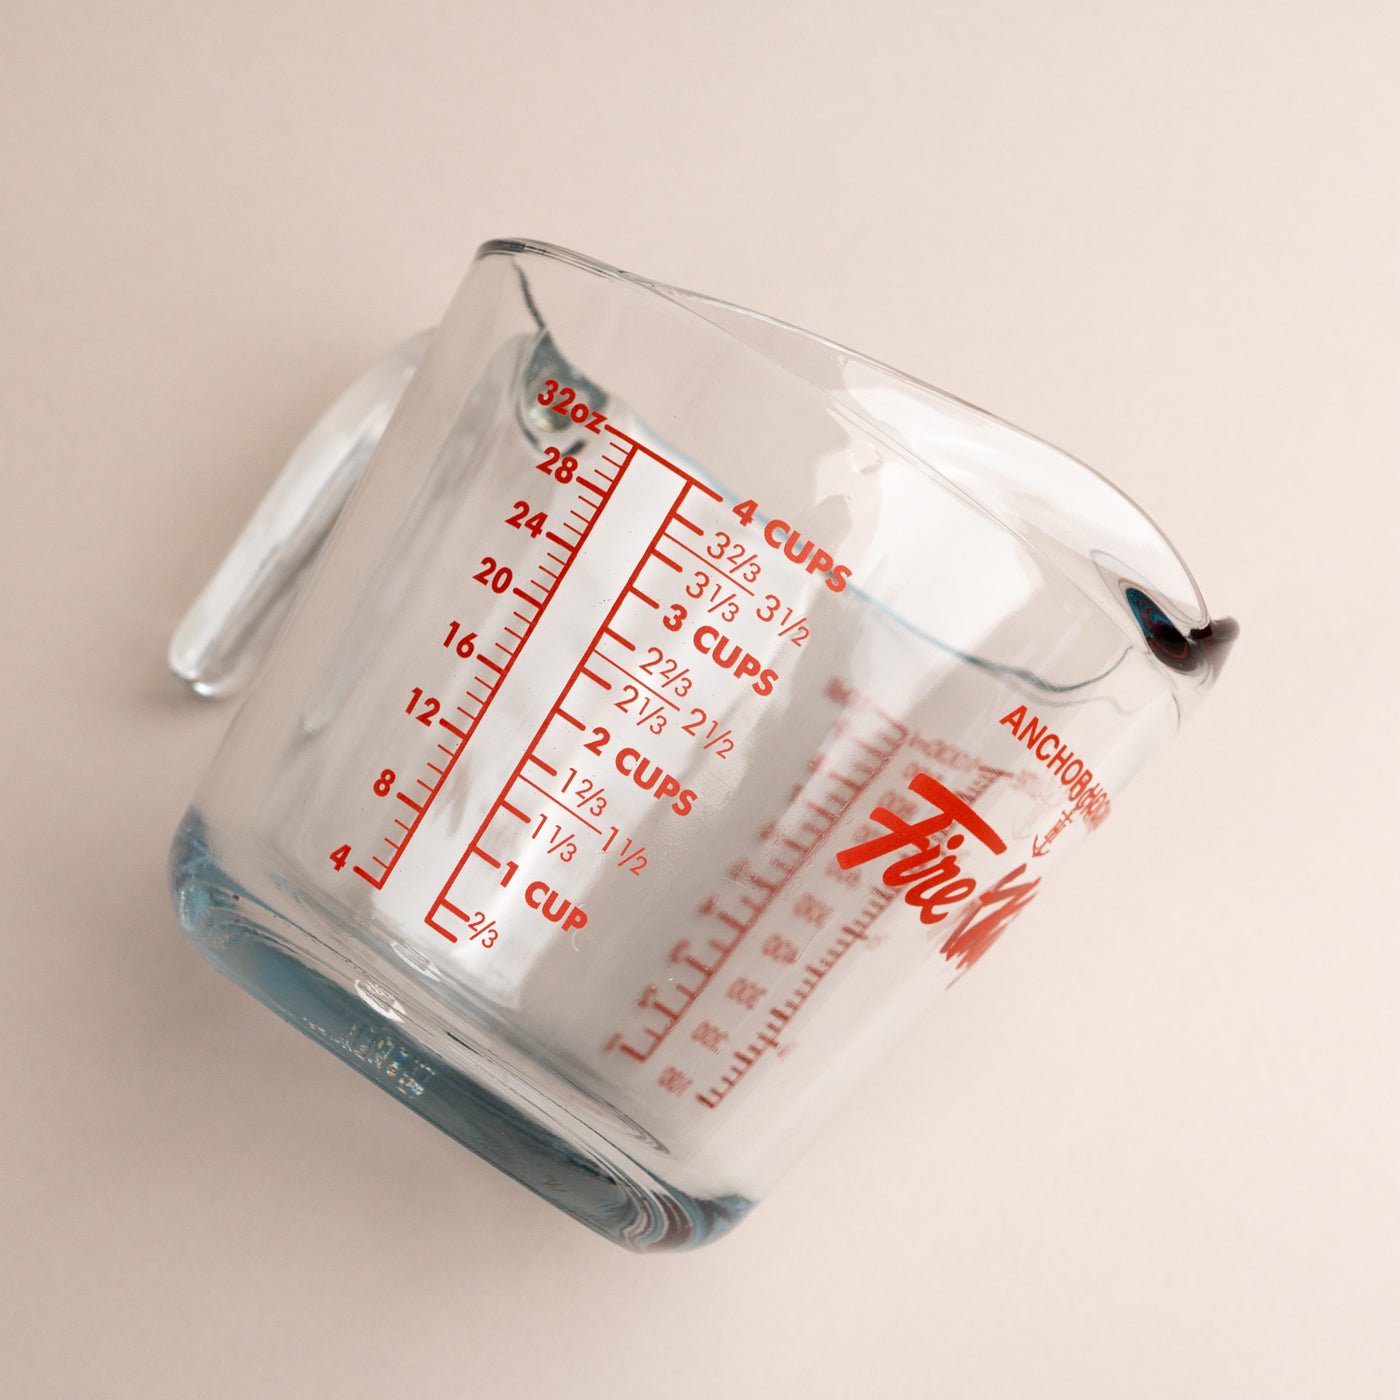 Measuring Cup - 4 cup